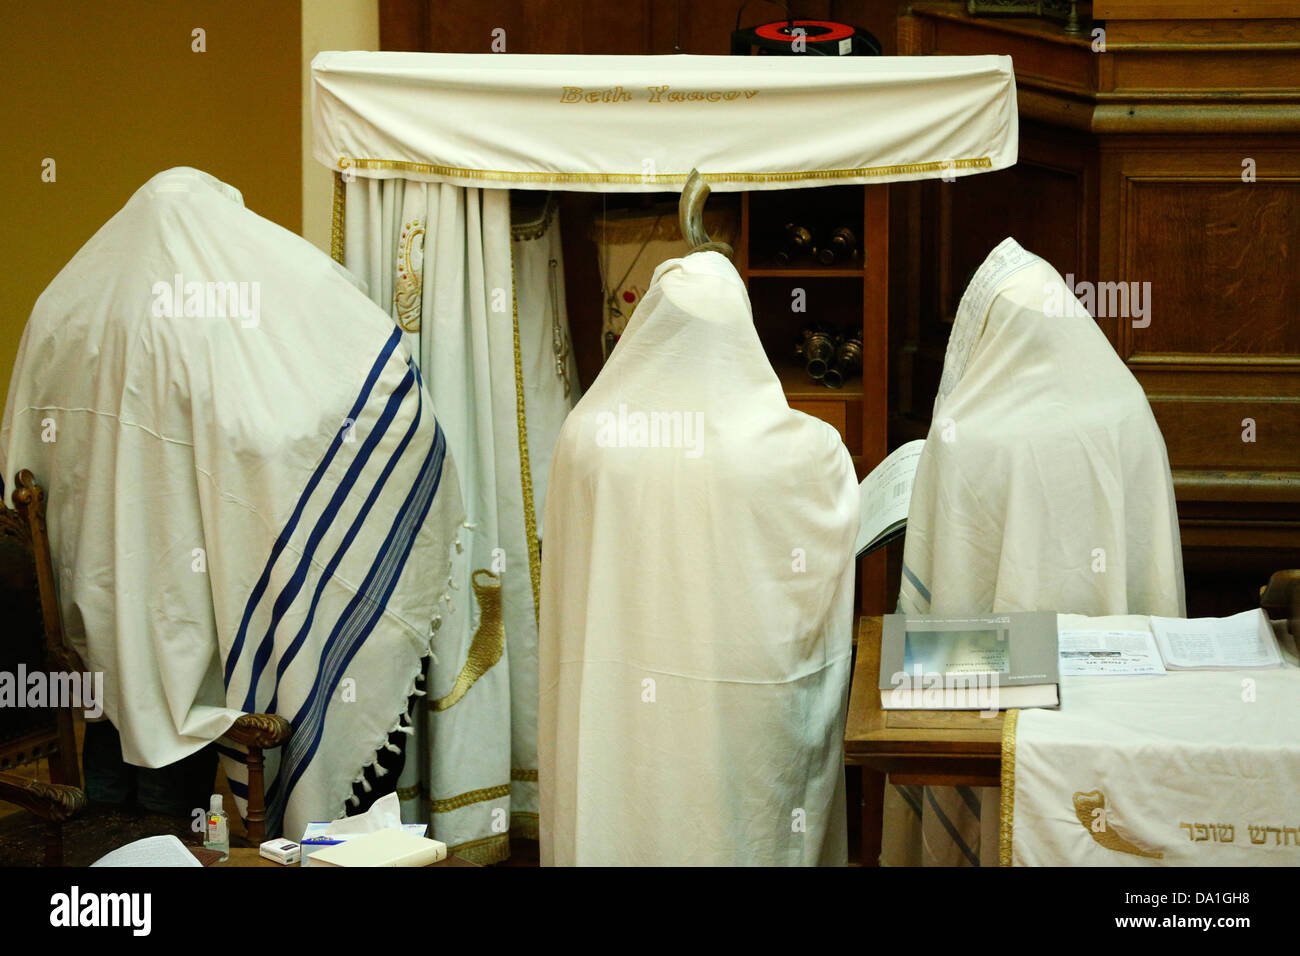 Yom Kippur also known as Day of Atonement, is the holiest day of the year for the Jewish people. Stock Photo